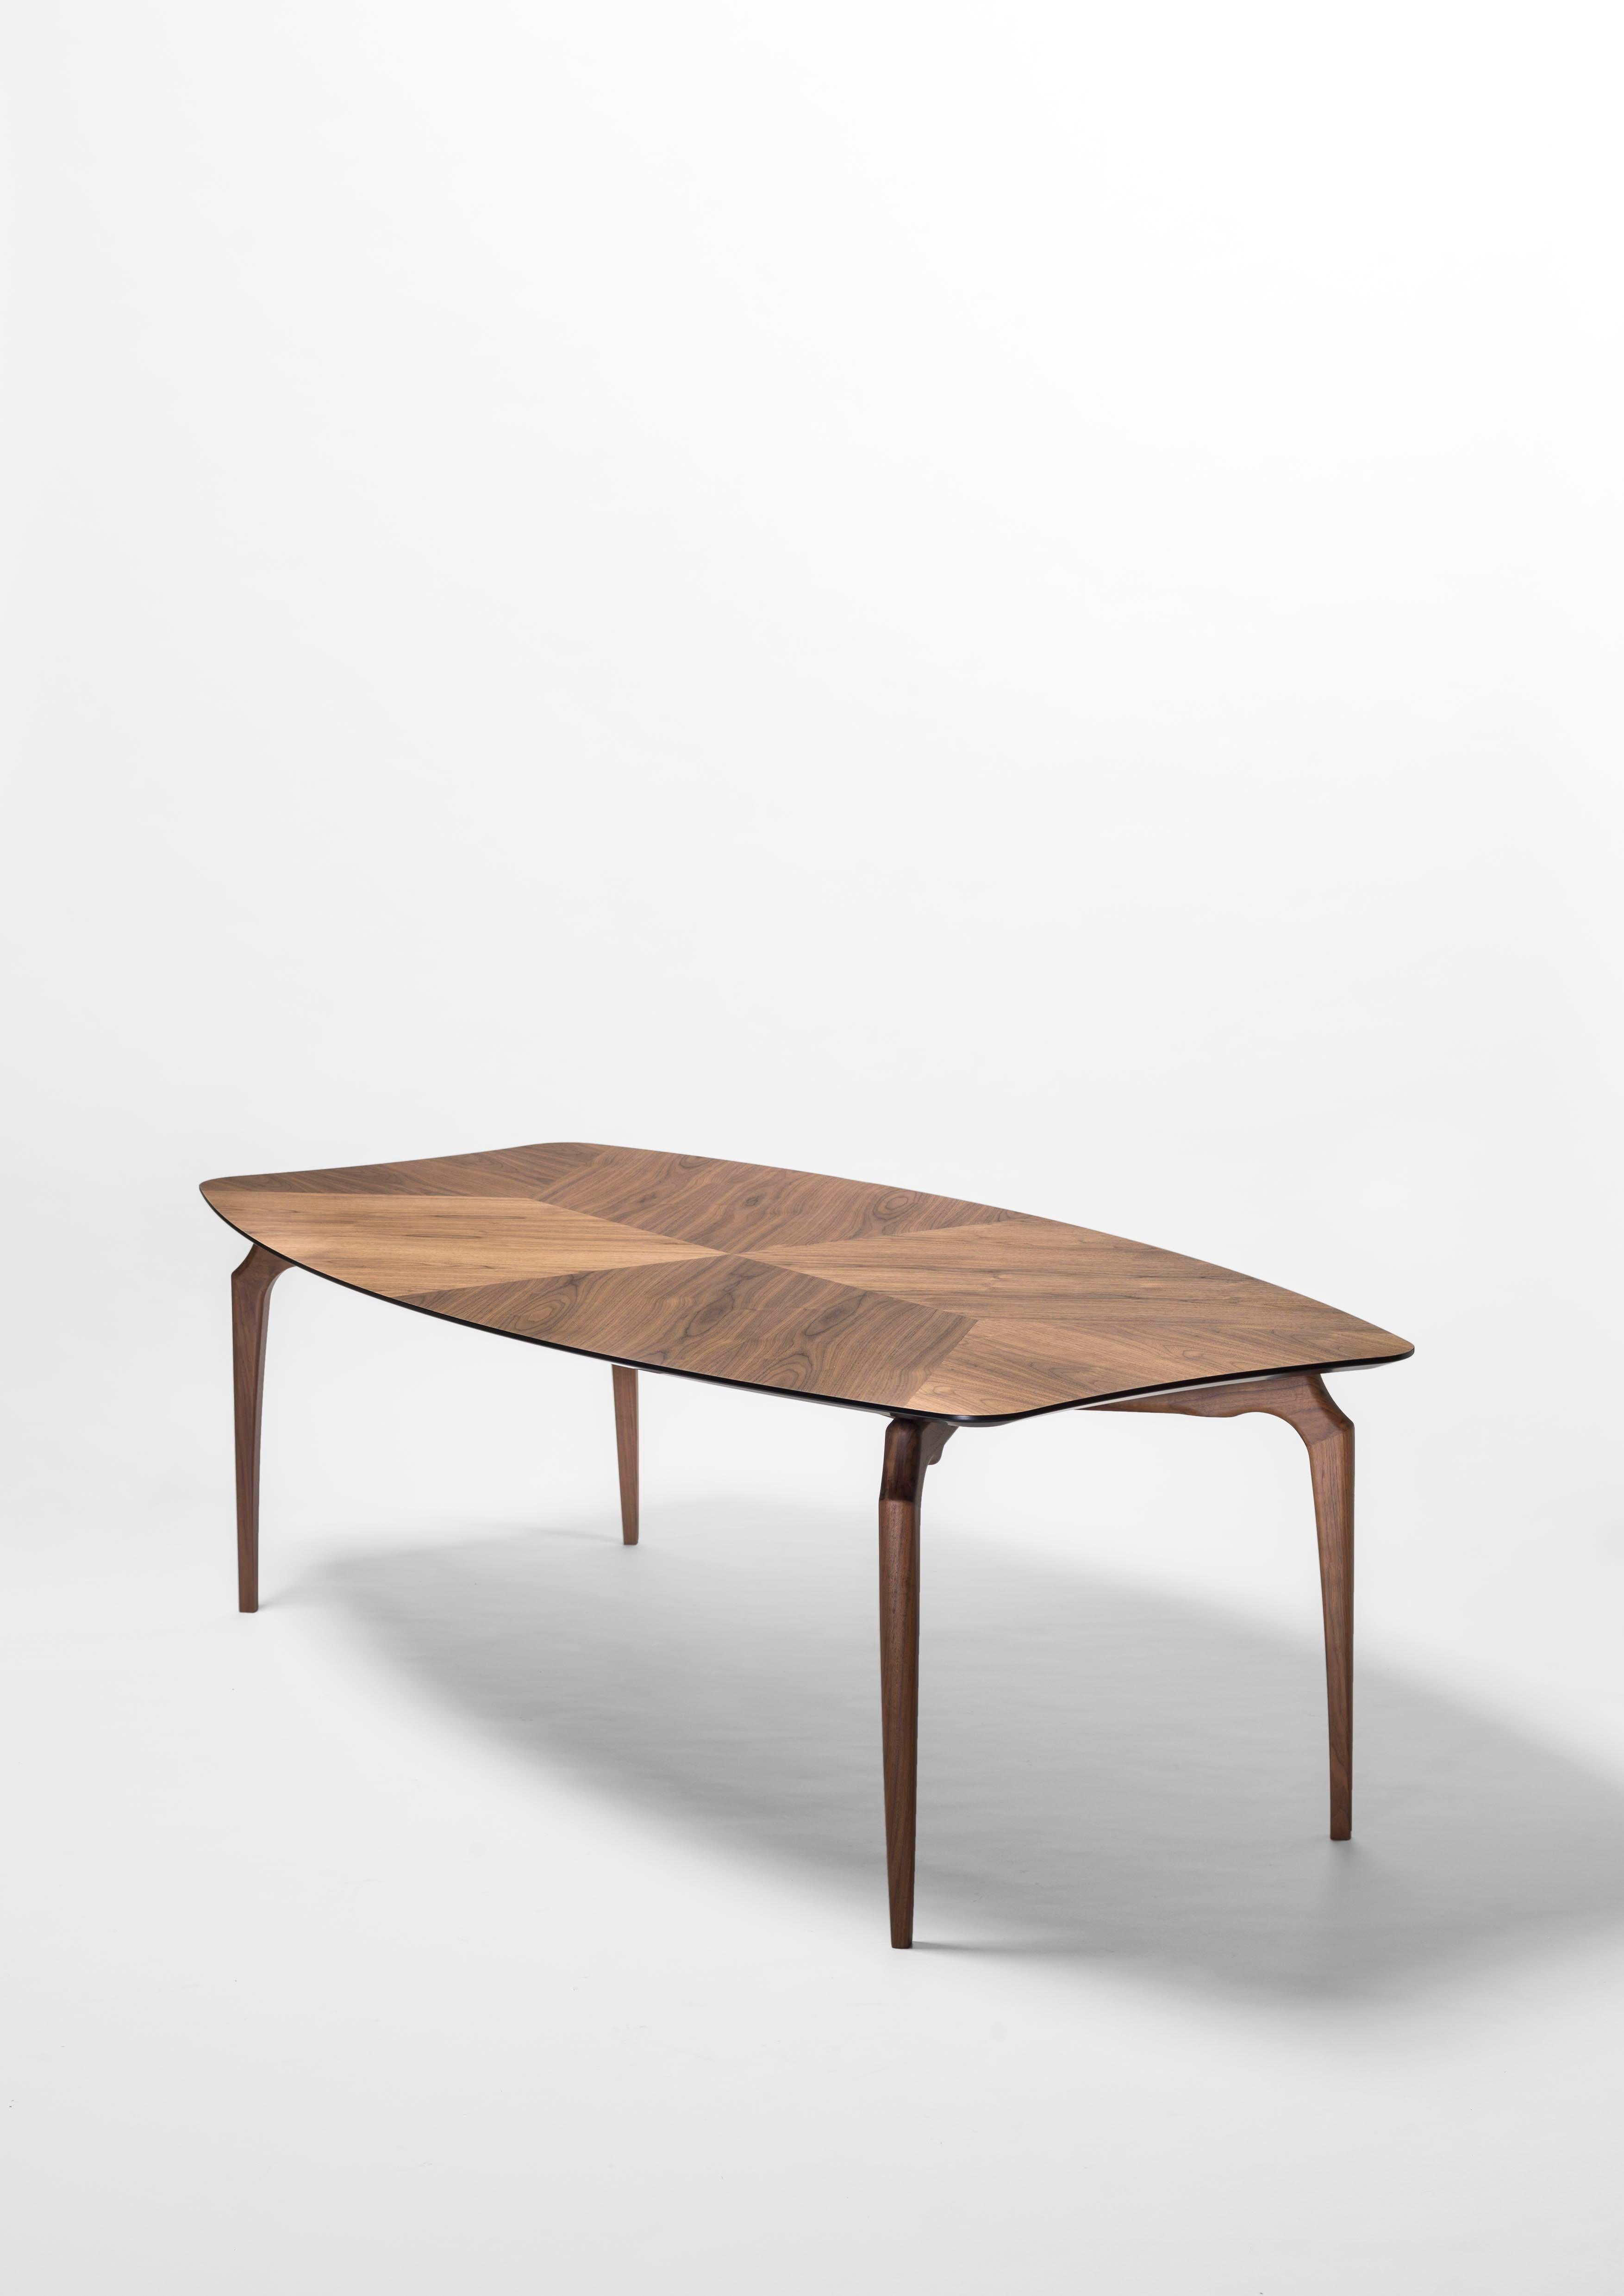 Oscar Tusquets Table 'Gaulino' Black Stained Wood by BD Barcelona For Sale 3